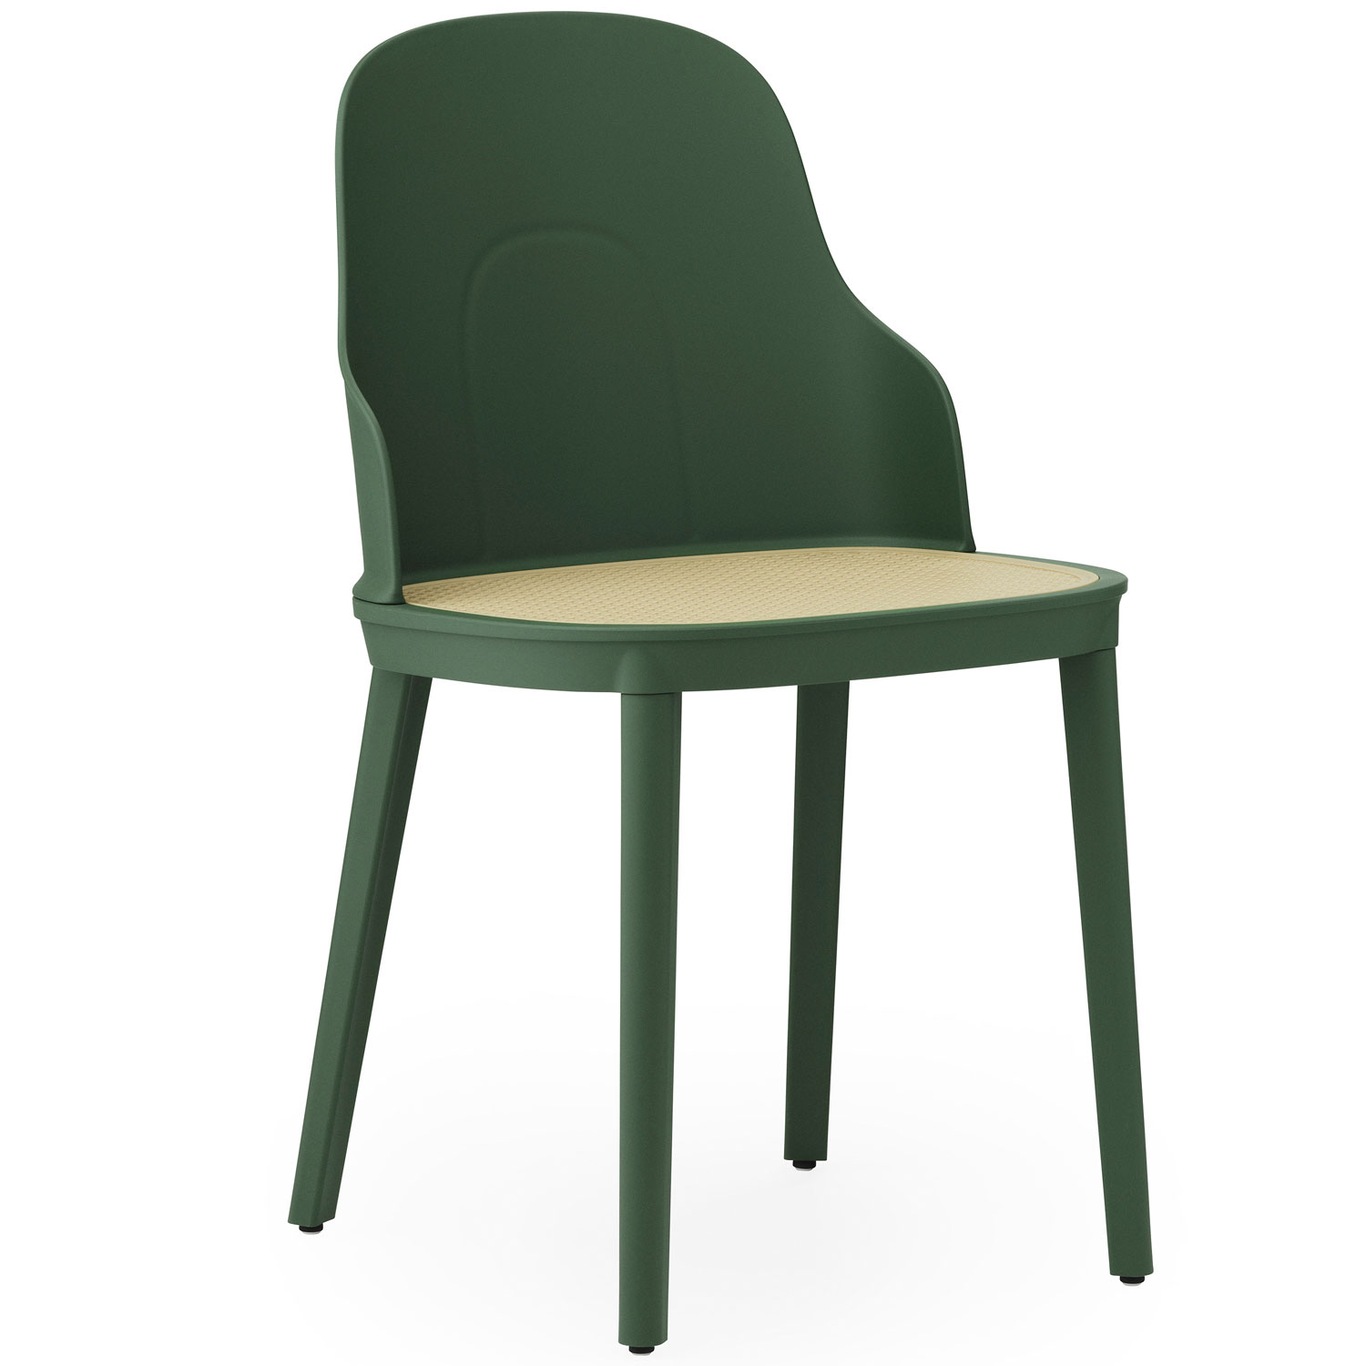 Allez Chair With Moulded Weave, Park Green